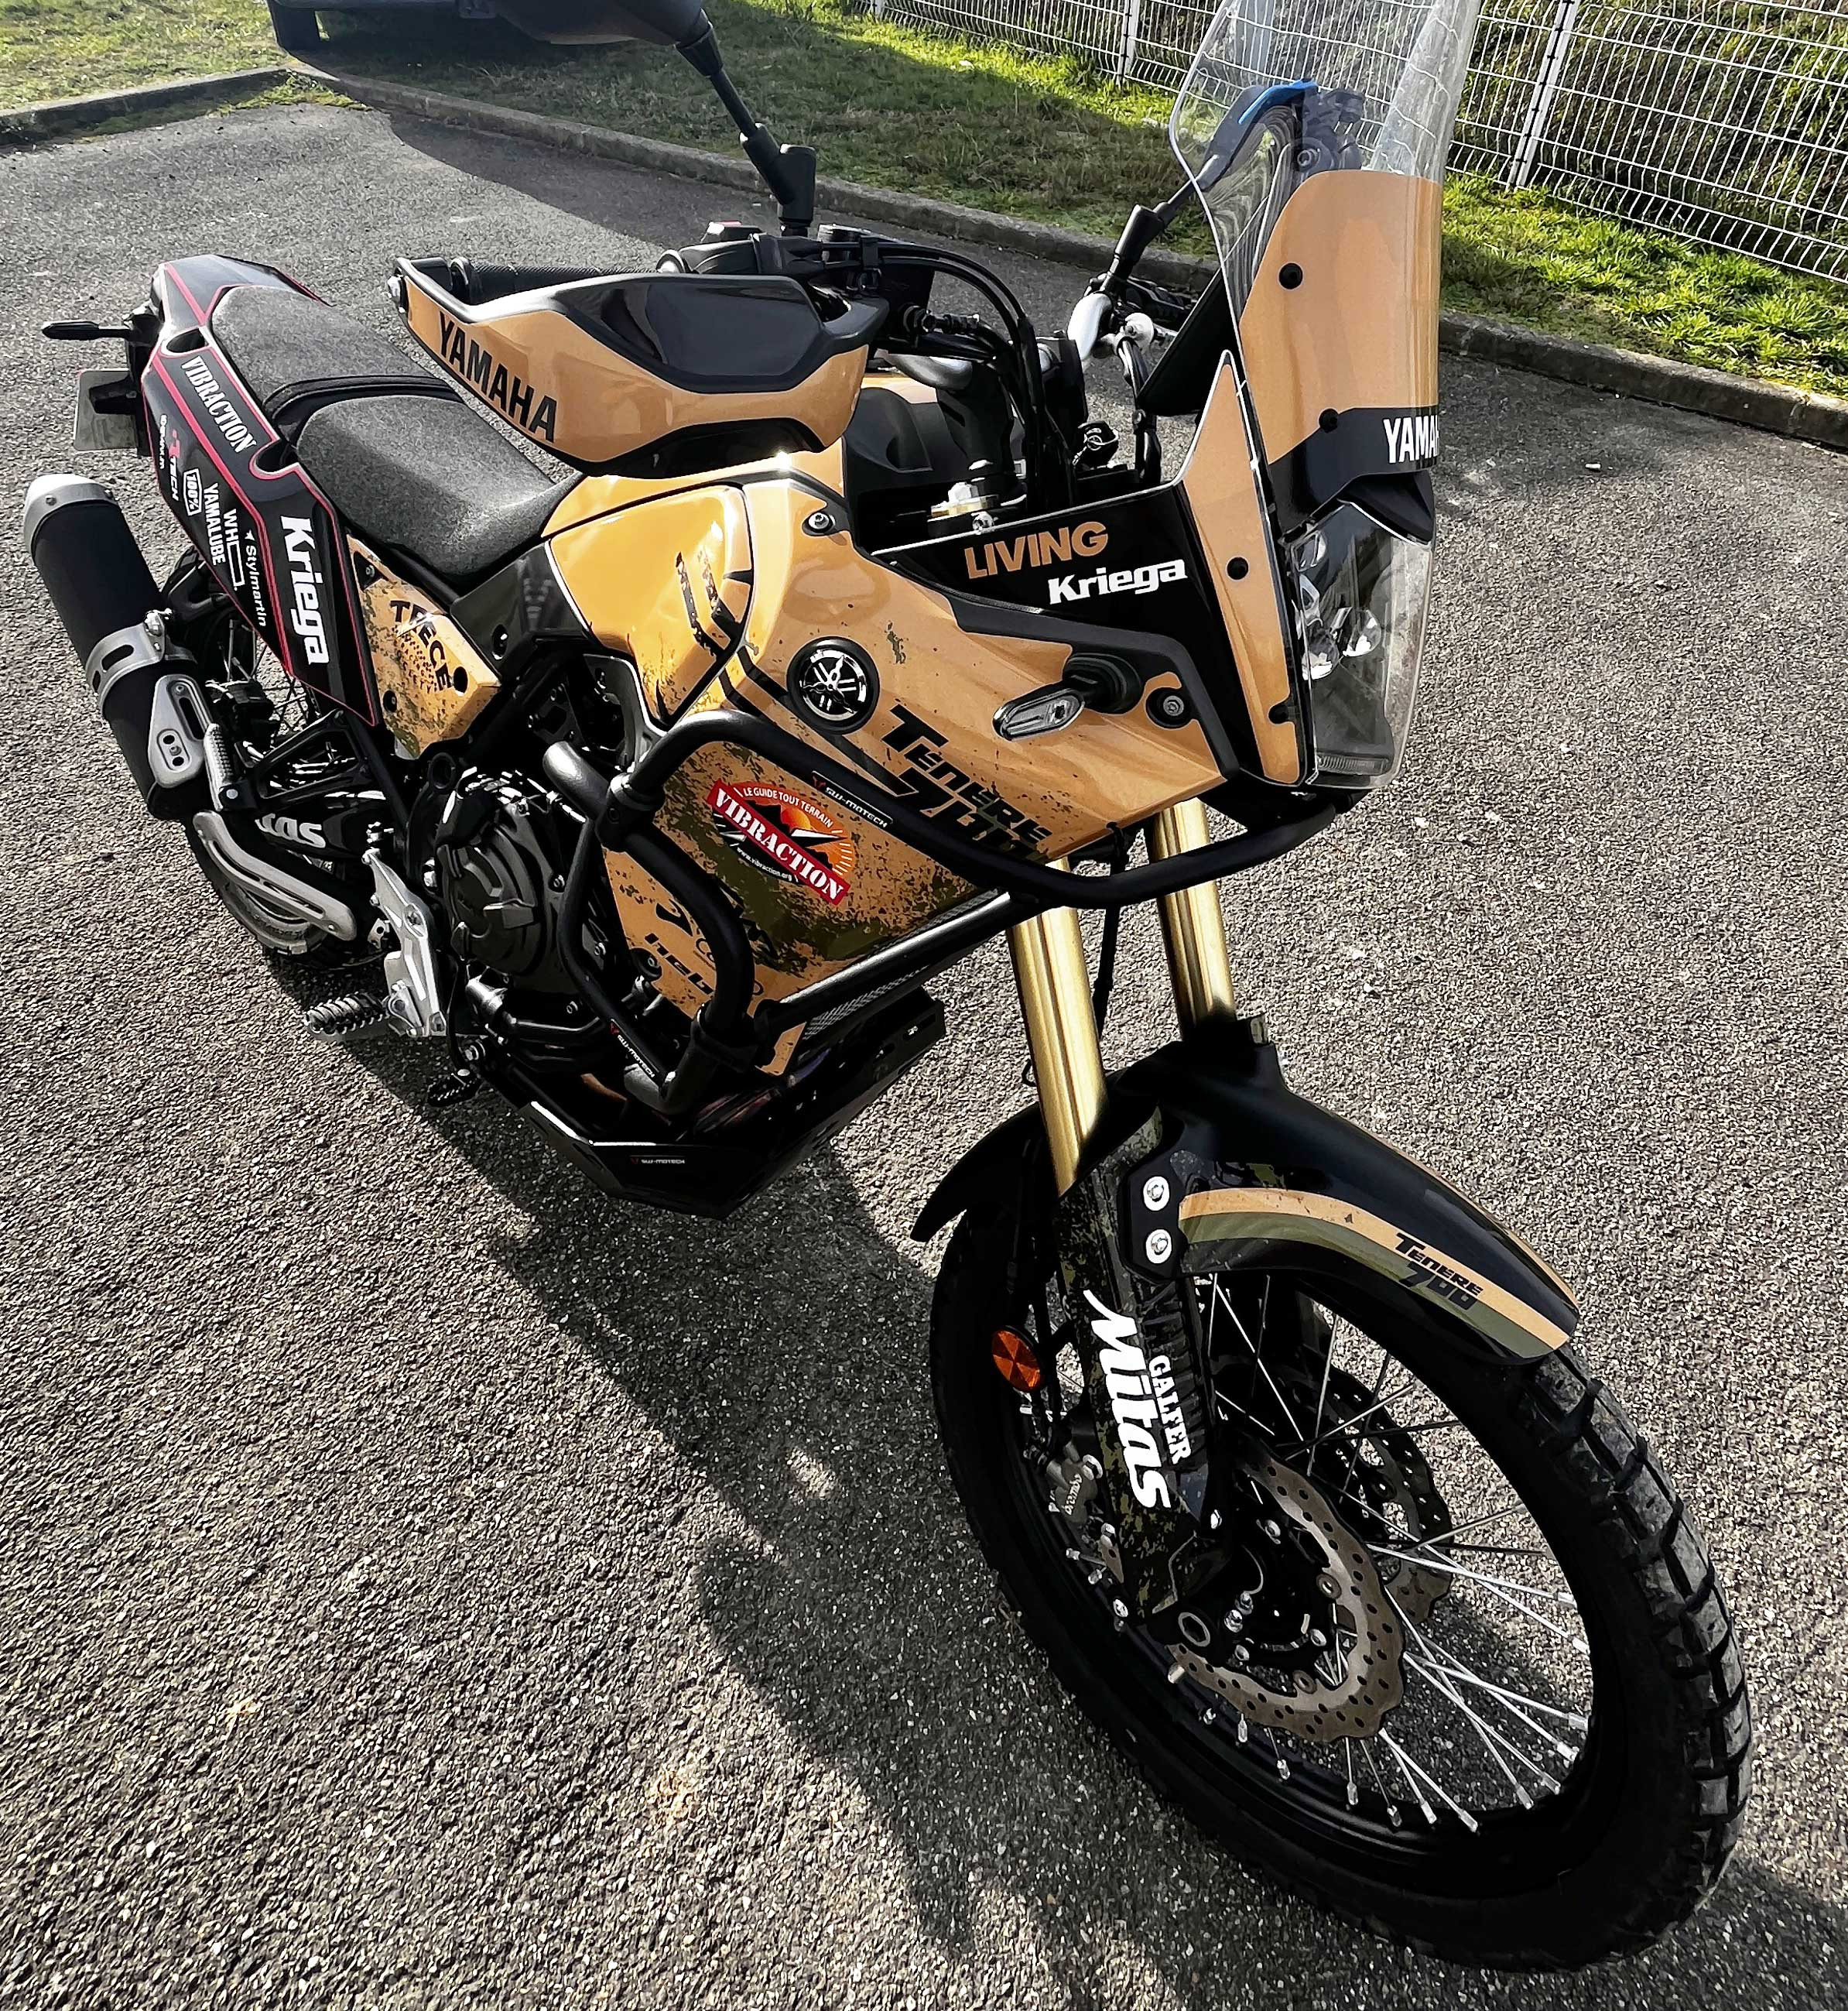 new decoration and sticker kit for the Yamaha 700 ténéré motorcycle